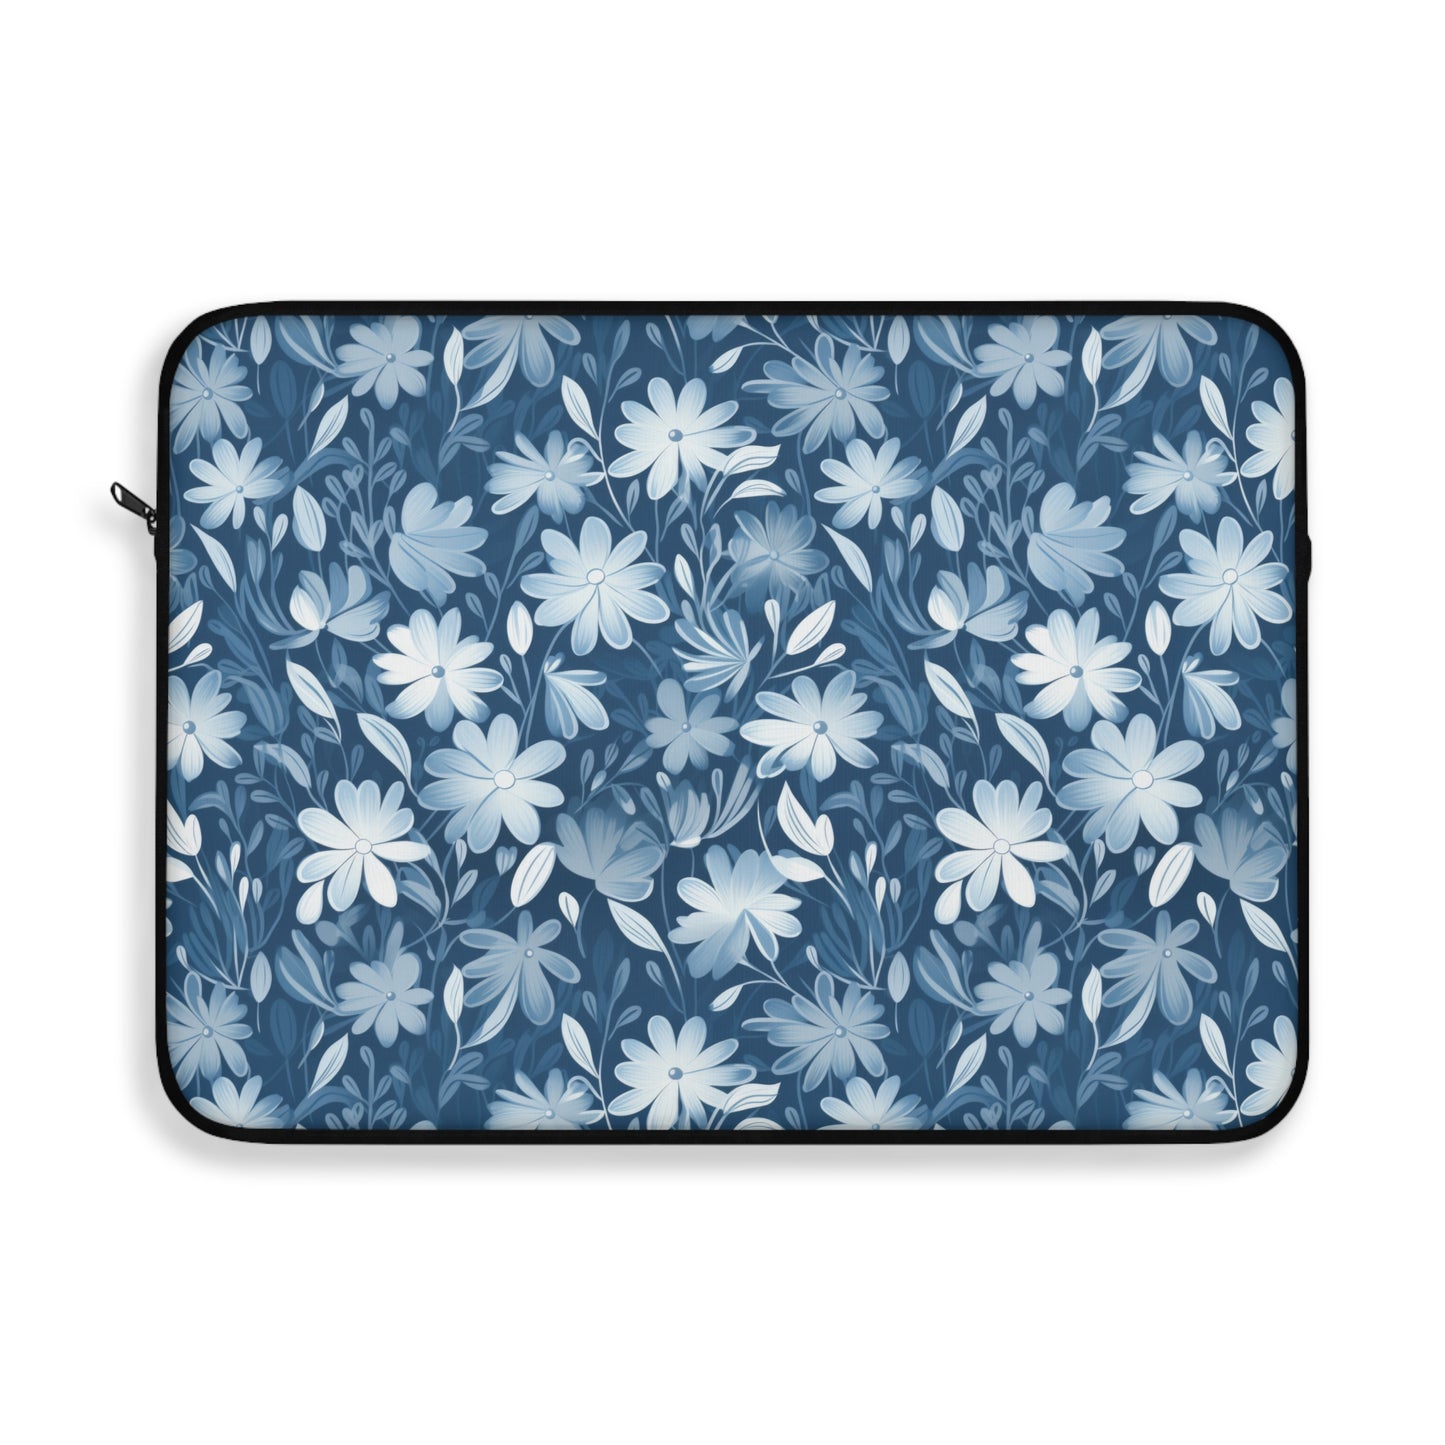 Gentle Elegance: Soft Muted Blue Flower Design - Laptop or Ipad Protective Sleeve 3 Sizes